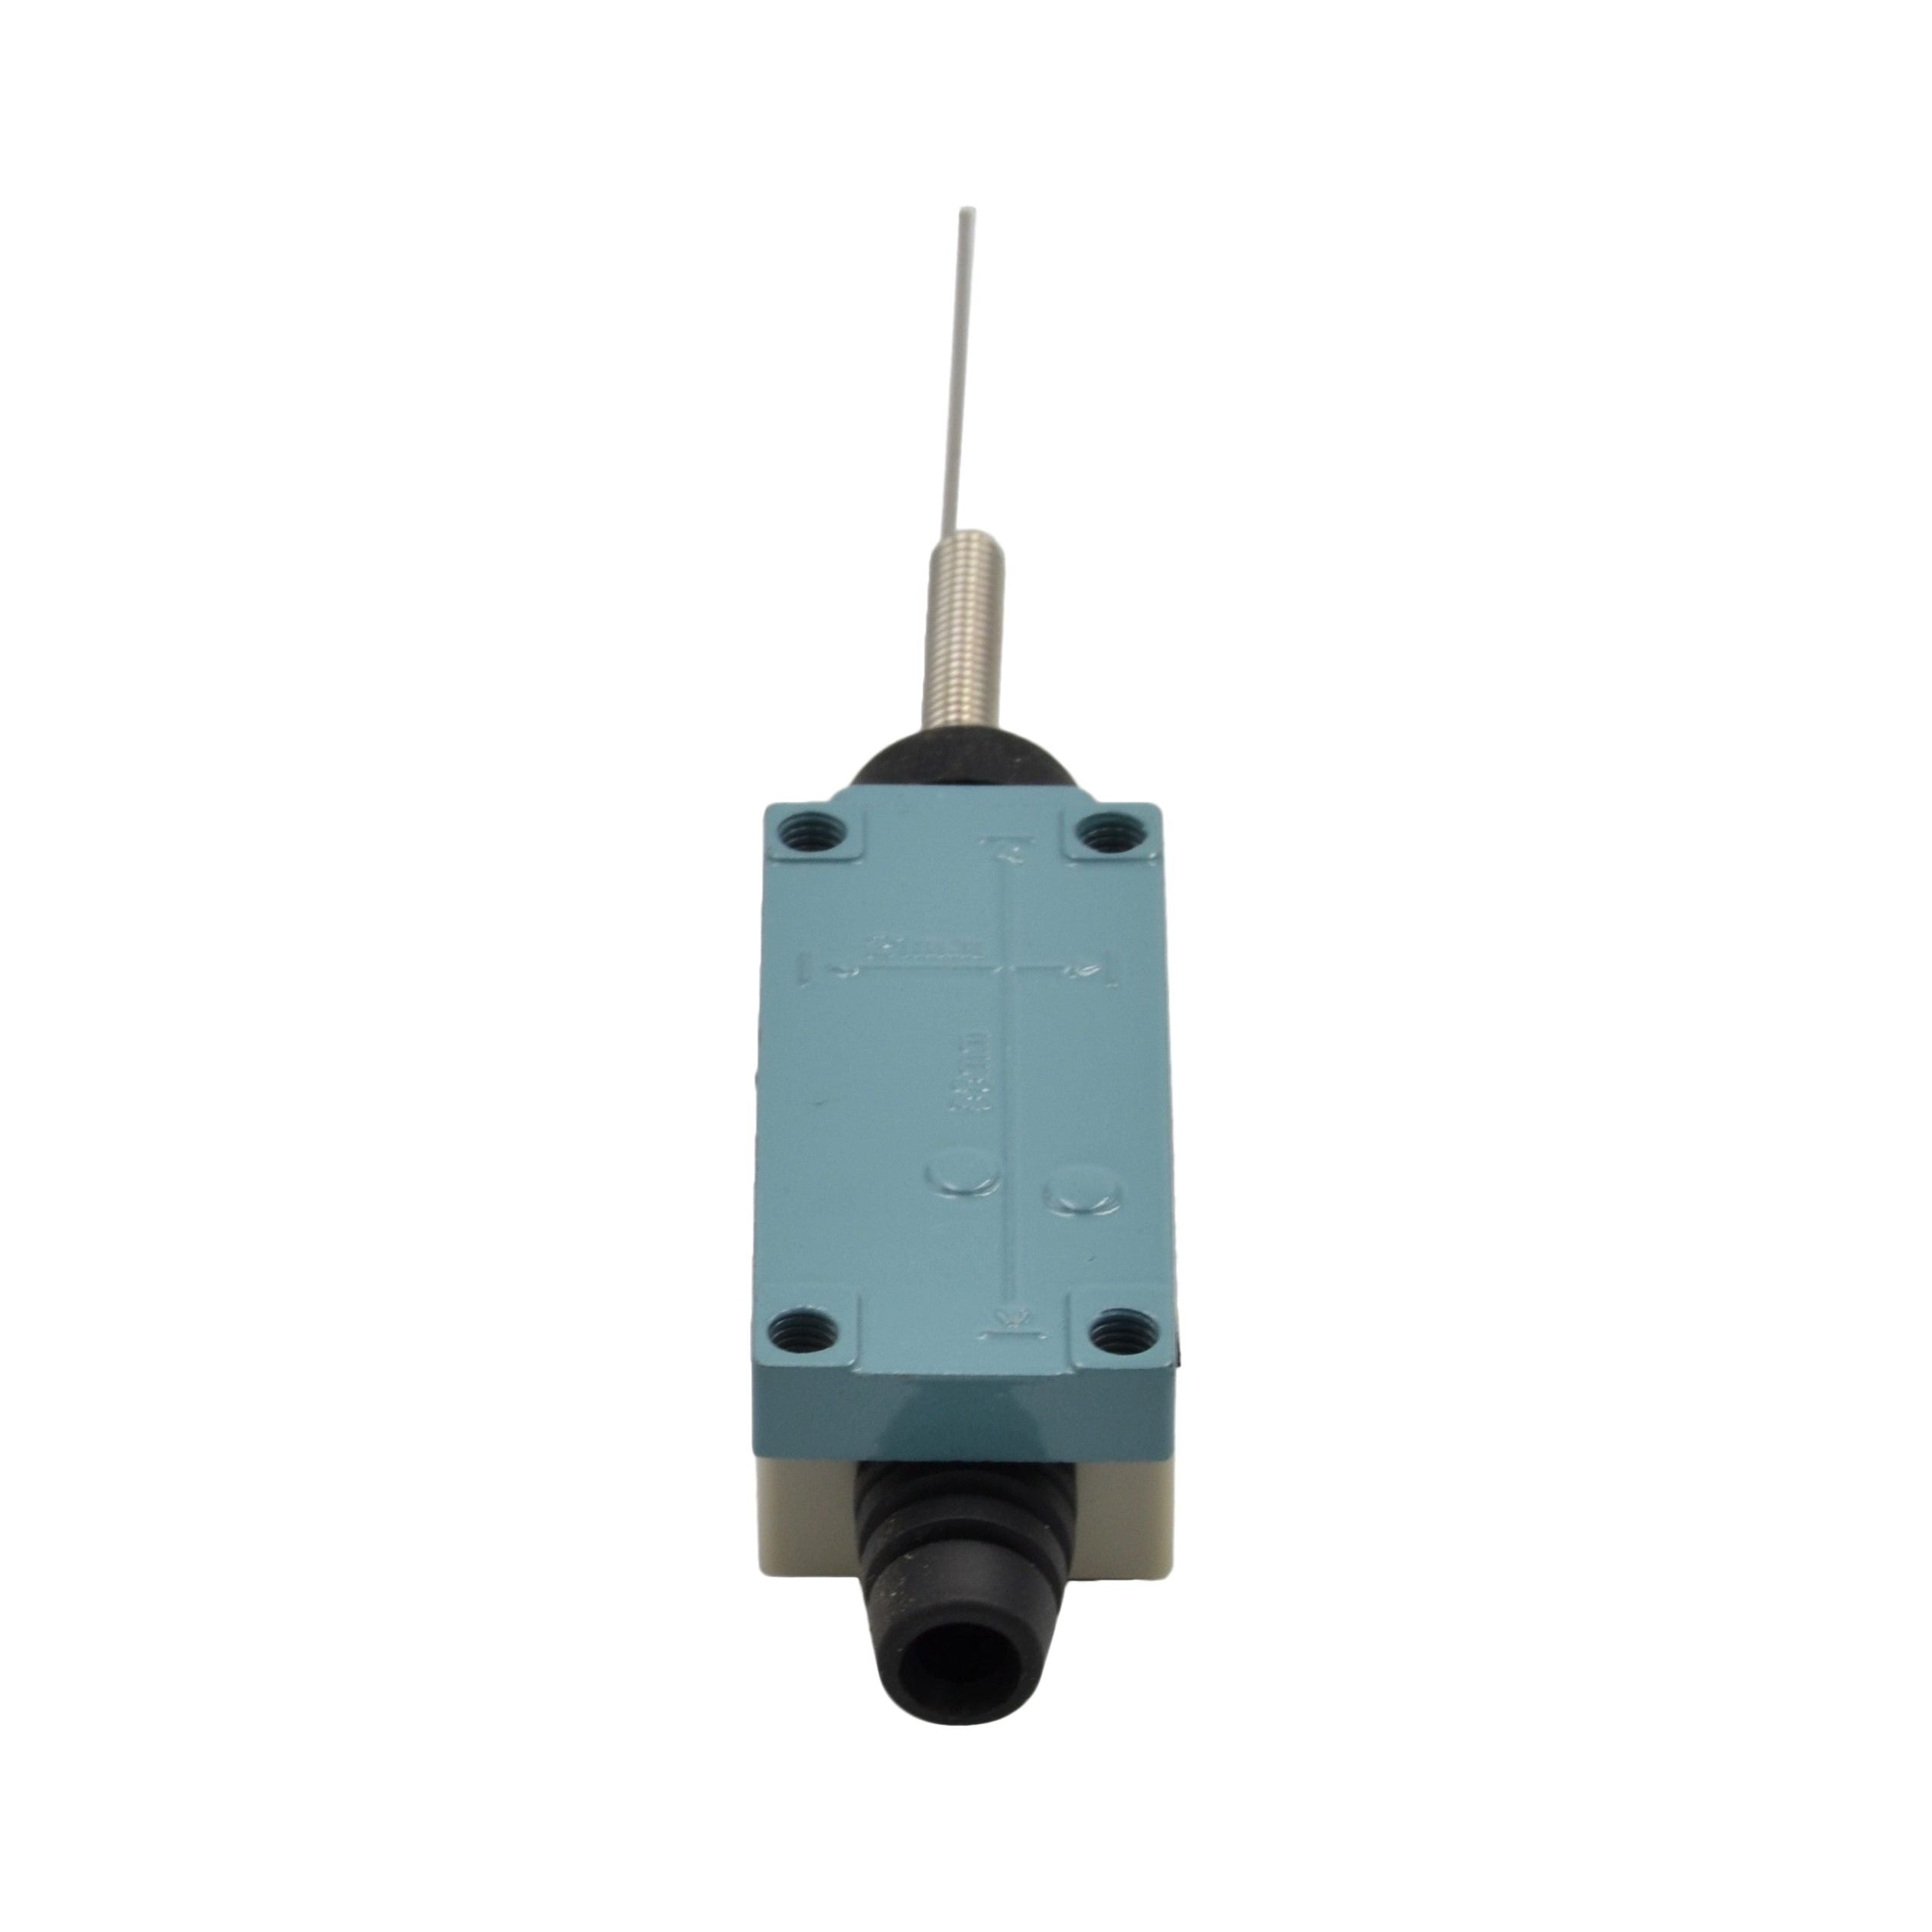 ME-8169 Momentary Flexible Spring Arm Actuator Limit Switch